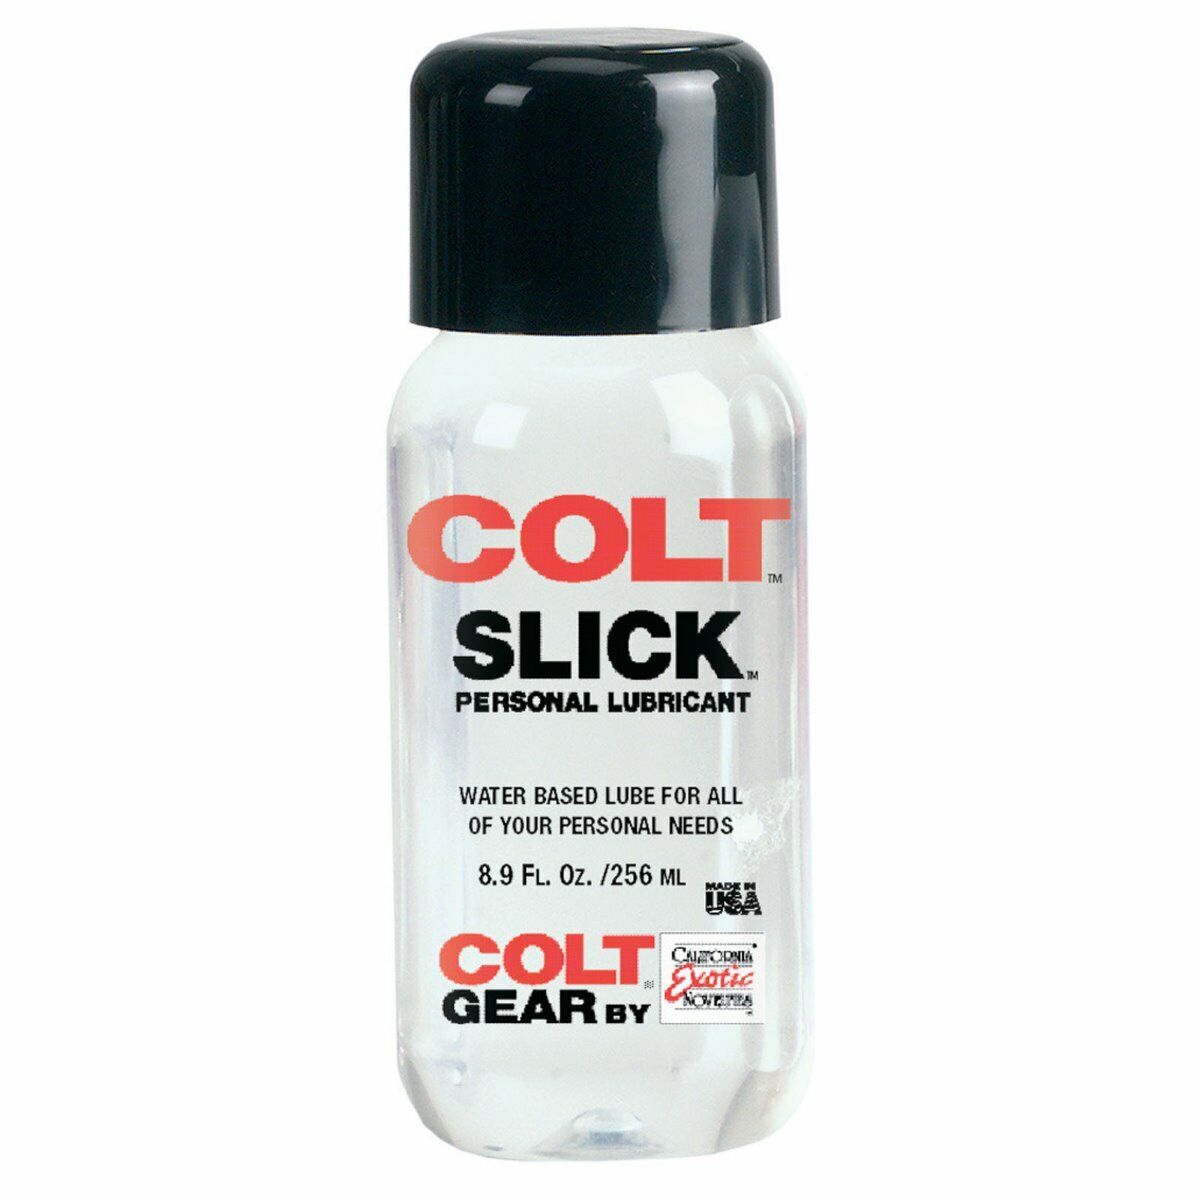 Colt Slick Personal Lubricant Water Based Massage Lube Body Glide 8.9 Oz 